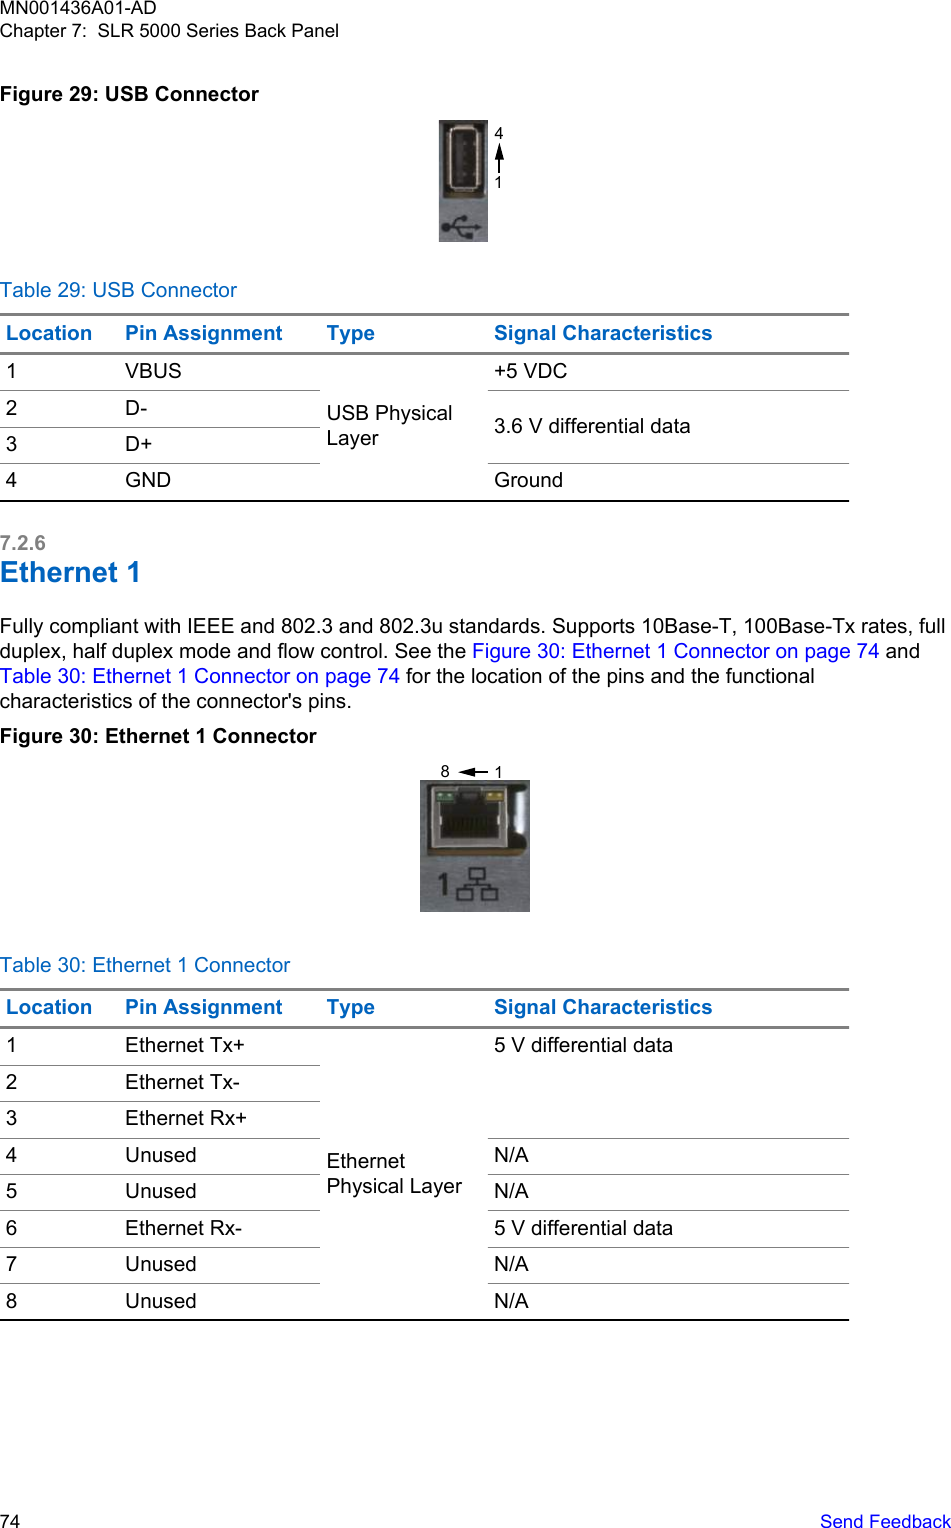 Figure 29: USB Connector14Table 29: USB ConnectorLocation Pin Assignment Type Signal Characteristics1 VBUSUSB PhysicalLayer+5 VDC2 D- 3.6 V differential data3 D+4 GND Ground7.2.6Ethernet 1Fully compliant with IEEE and 802.3 and 802.3u standards. Supports 10Base-T, 100Base-Tx rates, fullduplex, half duplex mode and flow control. See the Figure 30: Ethernet 1 Connector on page 74 and Table 30: Ethernet 1 Connector on page 74 for the location of the pins and the functionalcharacteristics of the connector&apos;s pins.Figure 30: Ethernet 1 Connector18Table 30: Ethernet 1 ConnectorLocation Pin Assignment Type Signal Characteristics1 Ethernet Tx+EthernetPhysical Layer5 V differential data2 Ethernet Tx-3 Ethernet Rx+4 Unused N/A5 Unused N/A6 Ethernet Rx- 5 V differential data7 Unused N/A8 Unused N/AMN001436A01-ADChapter 7:  SLR 5000 Series Back Panel74   Send Feedback